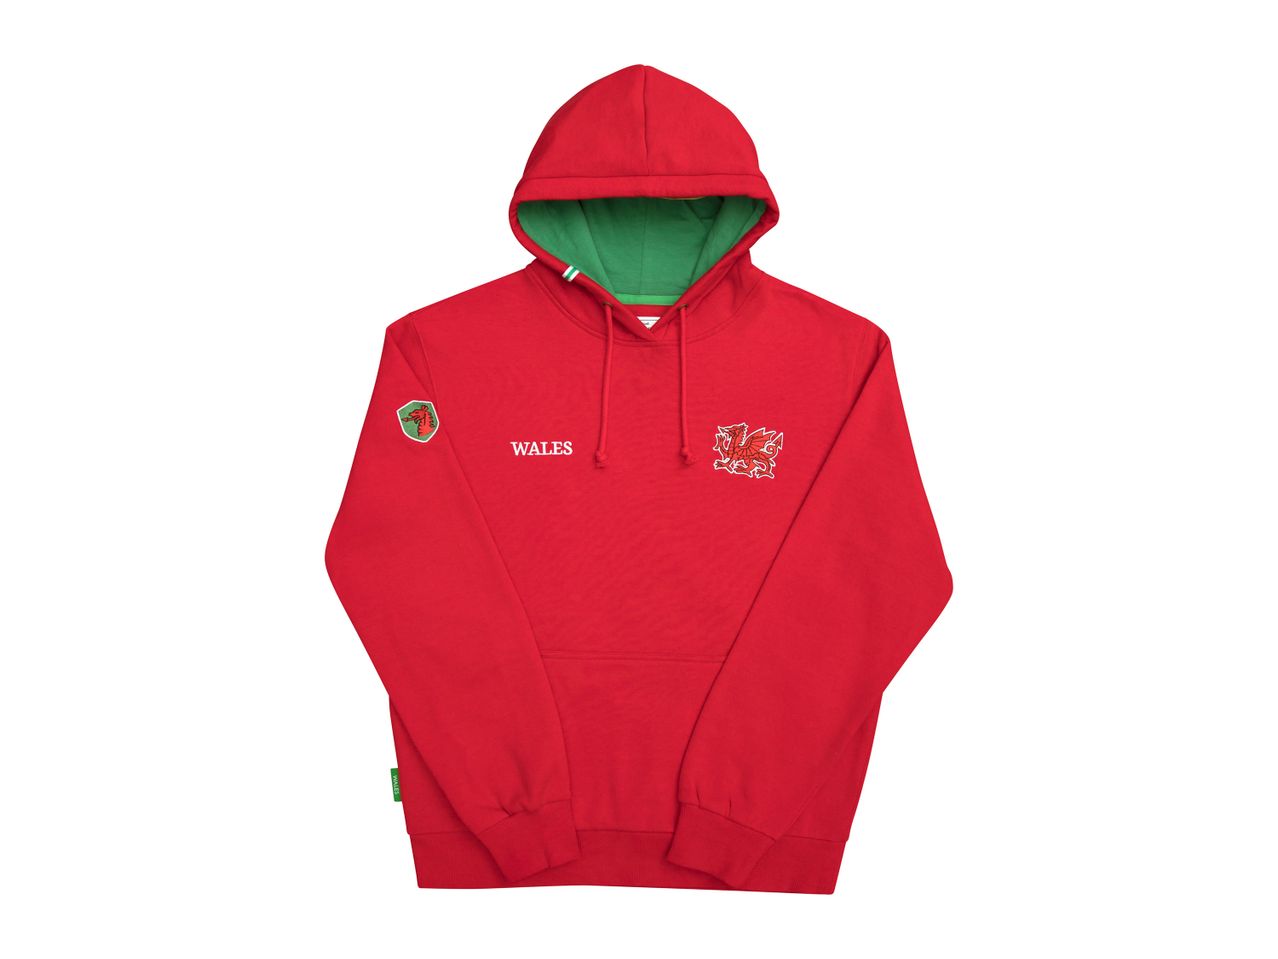 Go to full screen view: Adults’ Wales Rugby Hoodie - Image 2